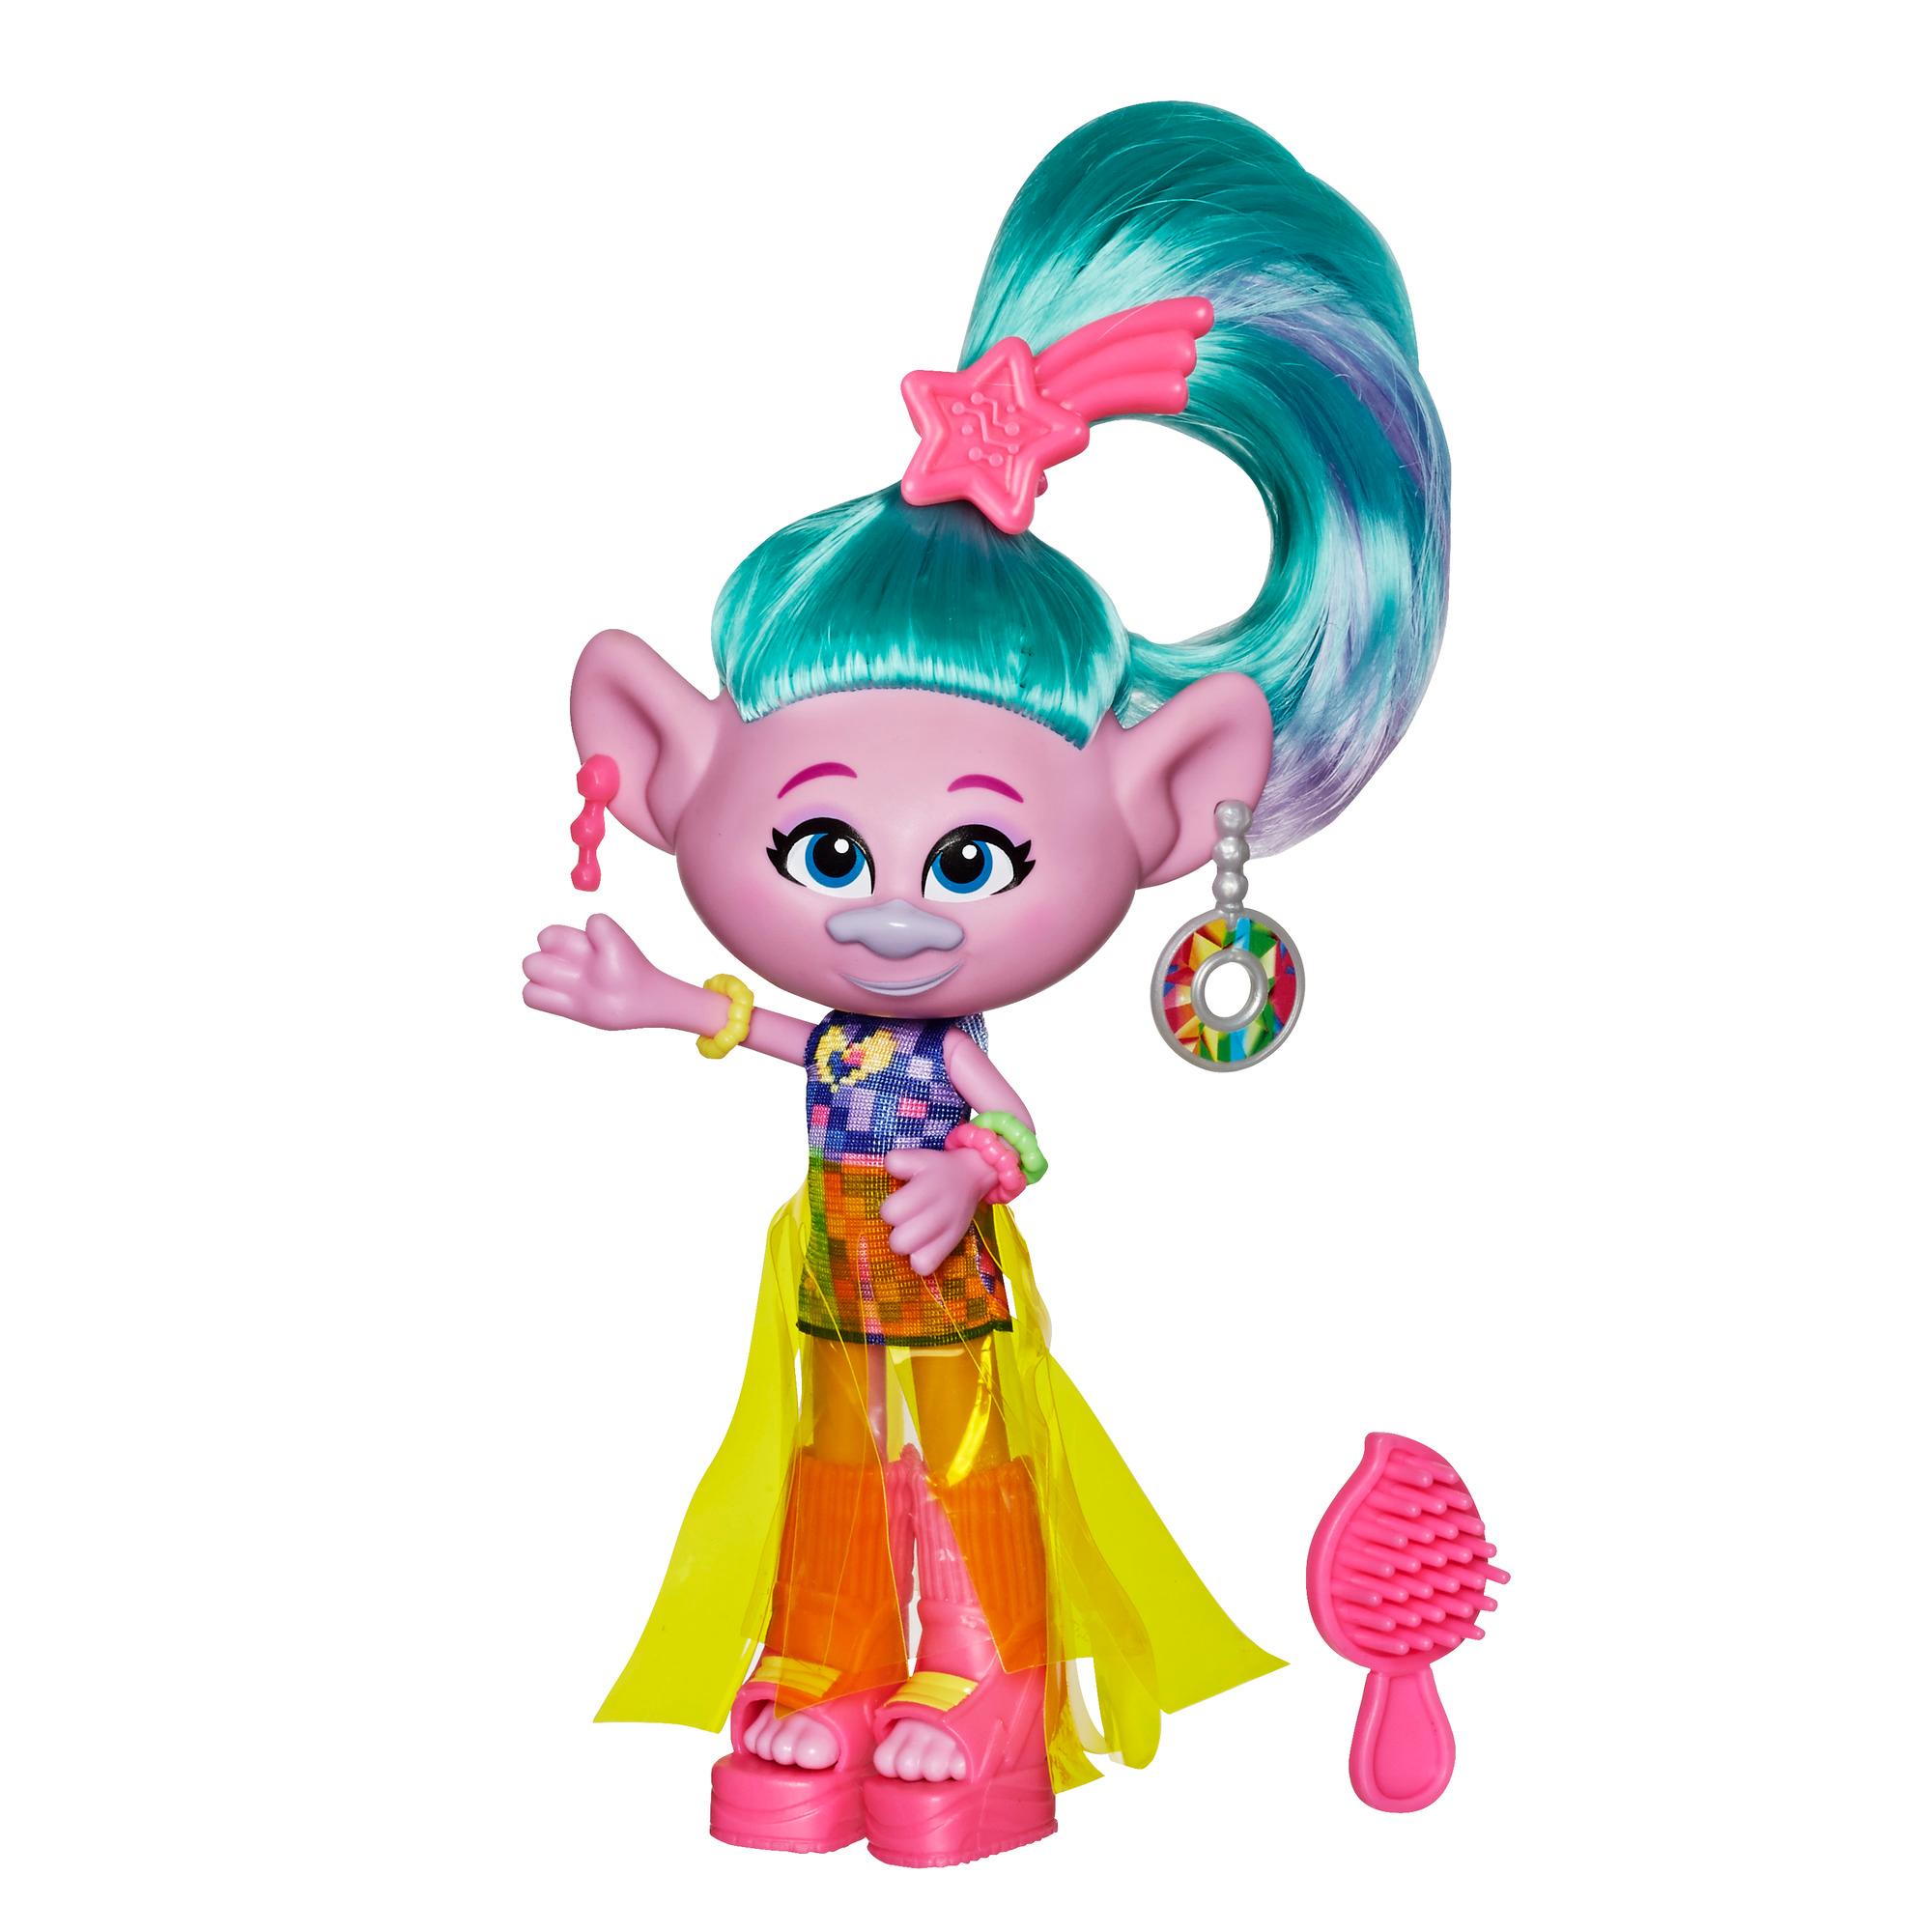 DreamWorks Trolls Glam Satin Fashion Doll with Dress, and More, Inspired by the Movie Trolls World Tour, Toy for Girls